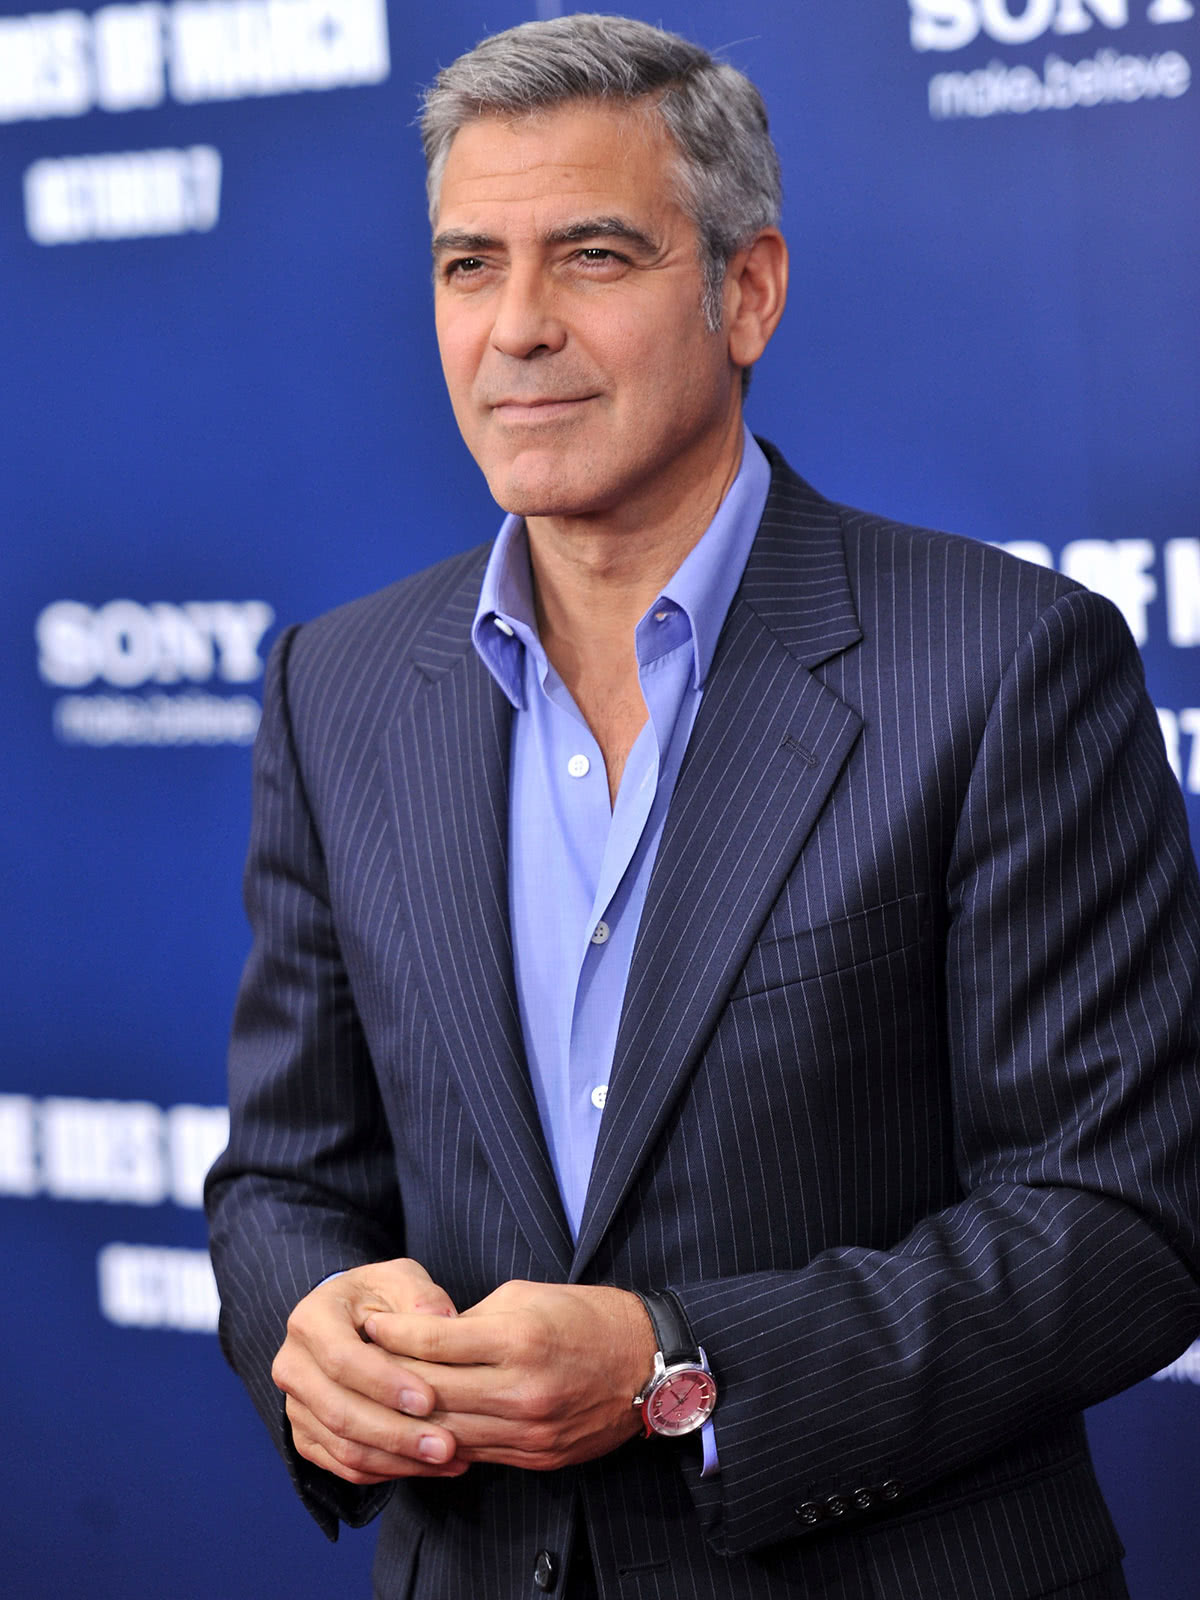 business casual men dress code guide George Clooney style - Luxe Digital